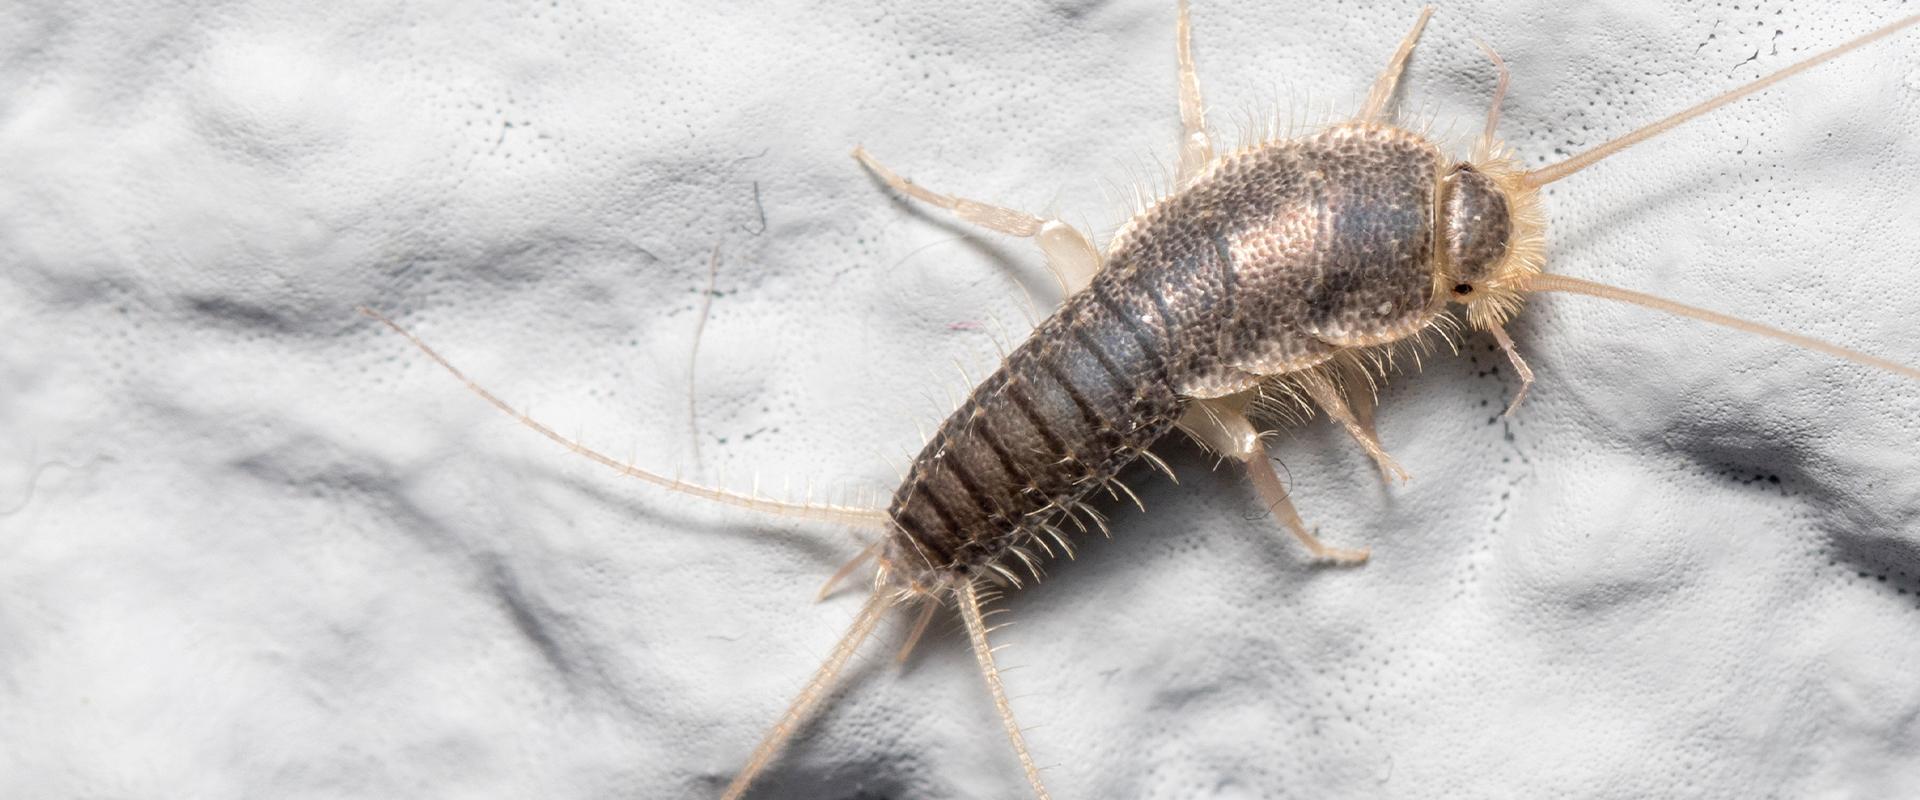 silverfish on counter